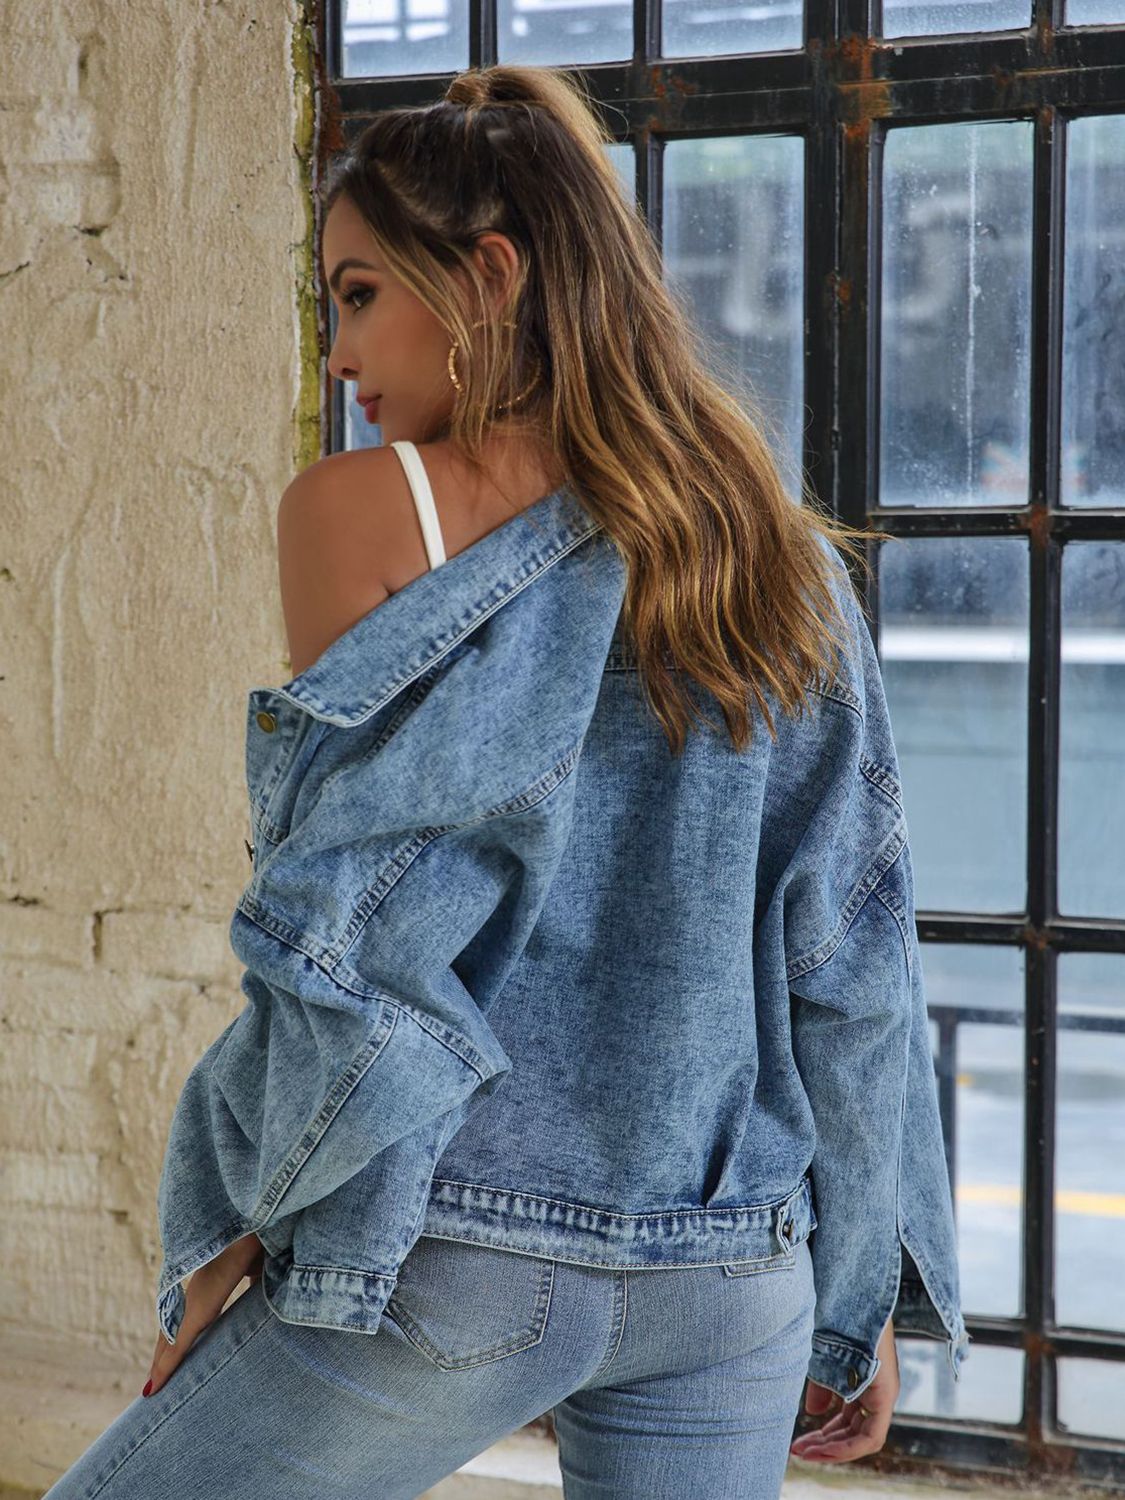 Slate Gray Collared Neck Dropped Shoulder Denim Jacket Sentient Beauty Fashions Apparel & Accessories